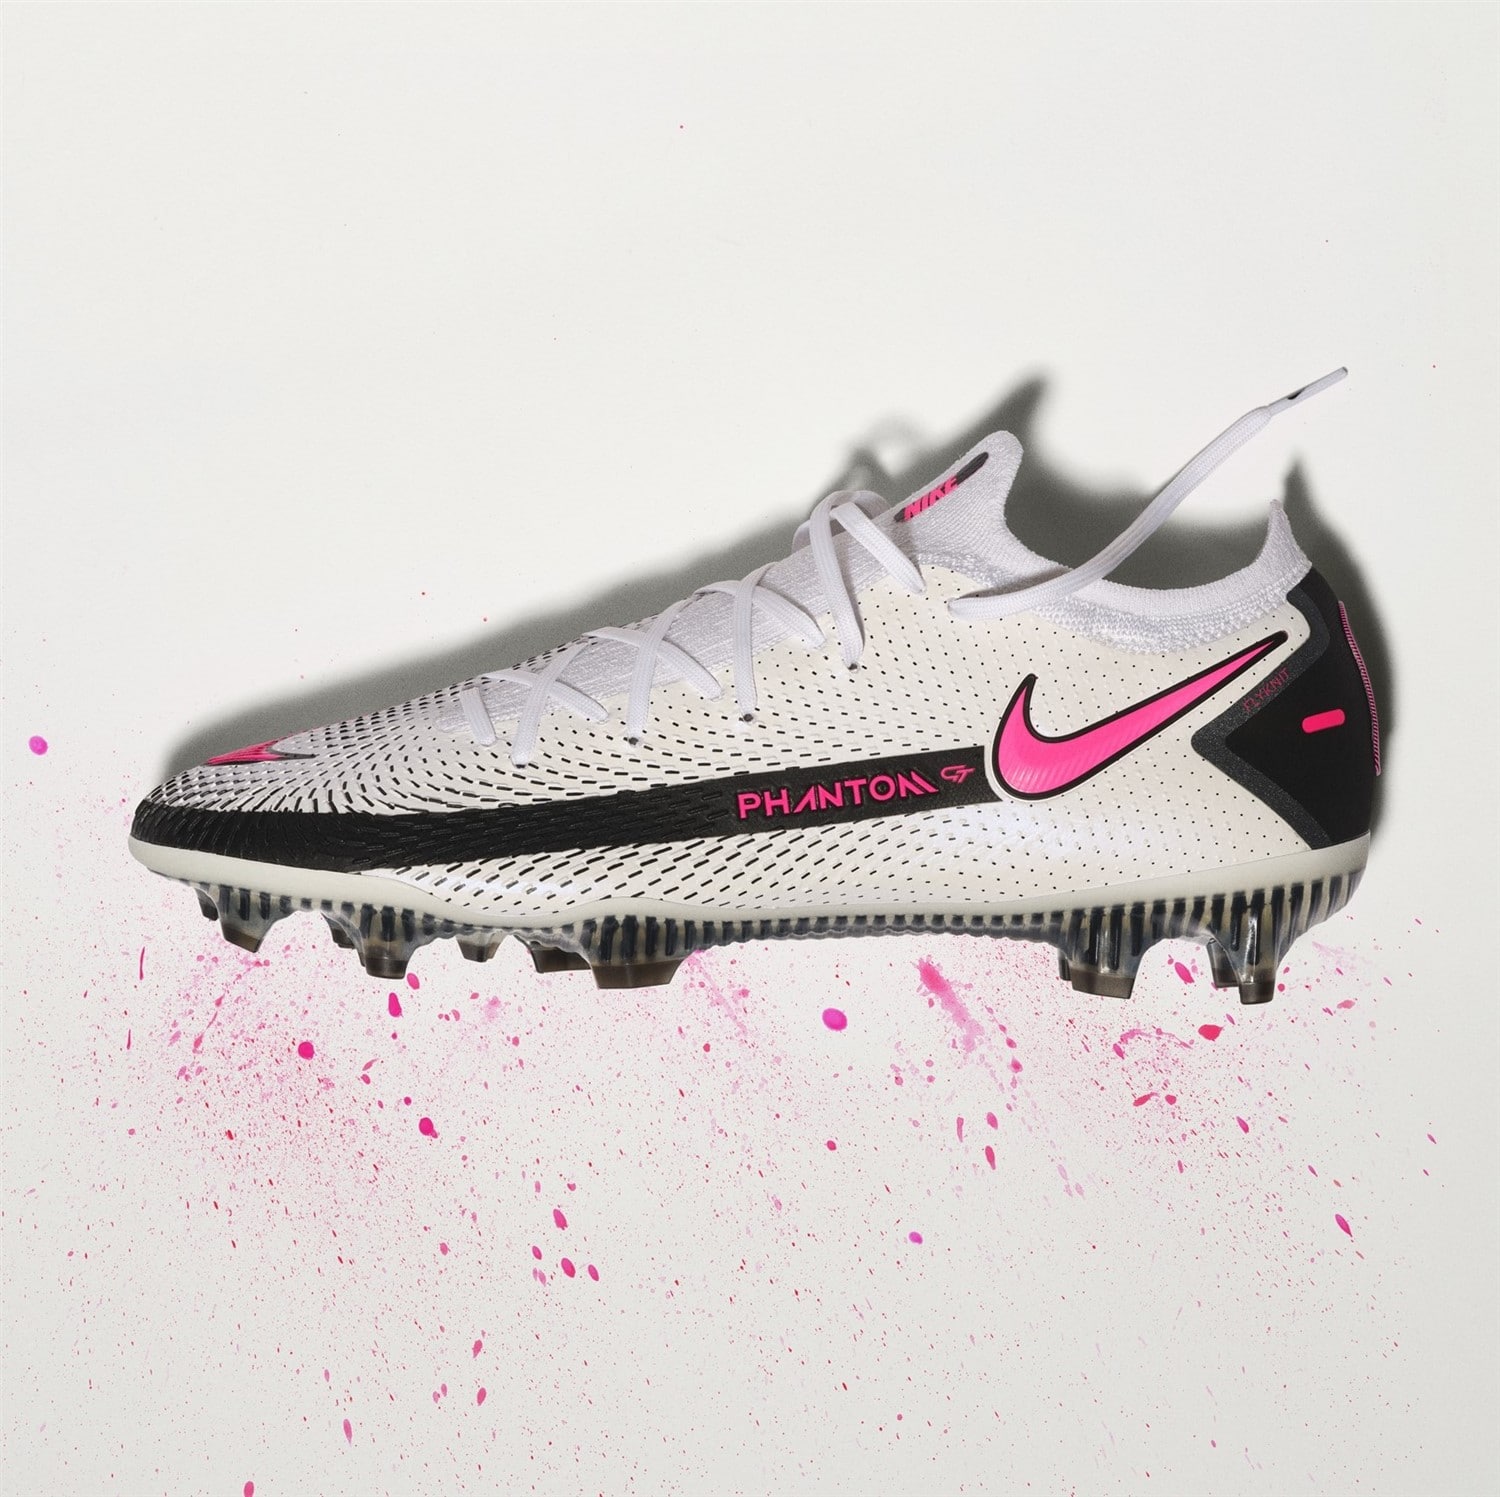 Nike Phantom GT football boots soccer cleats review